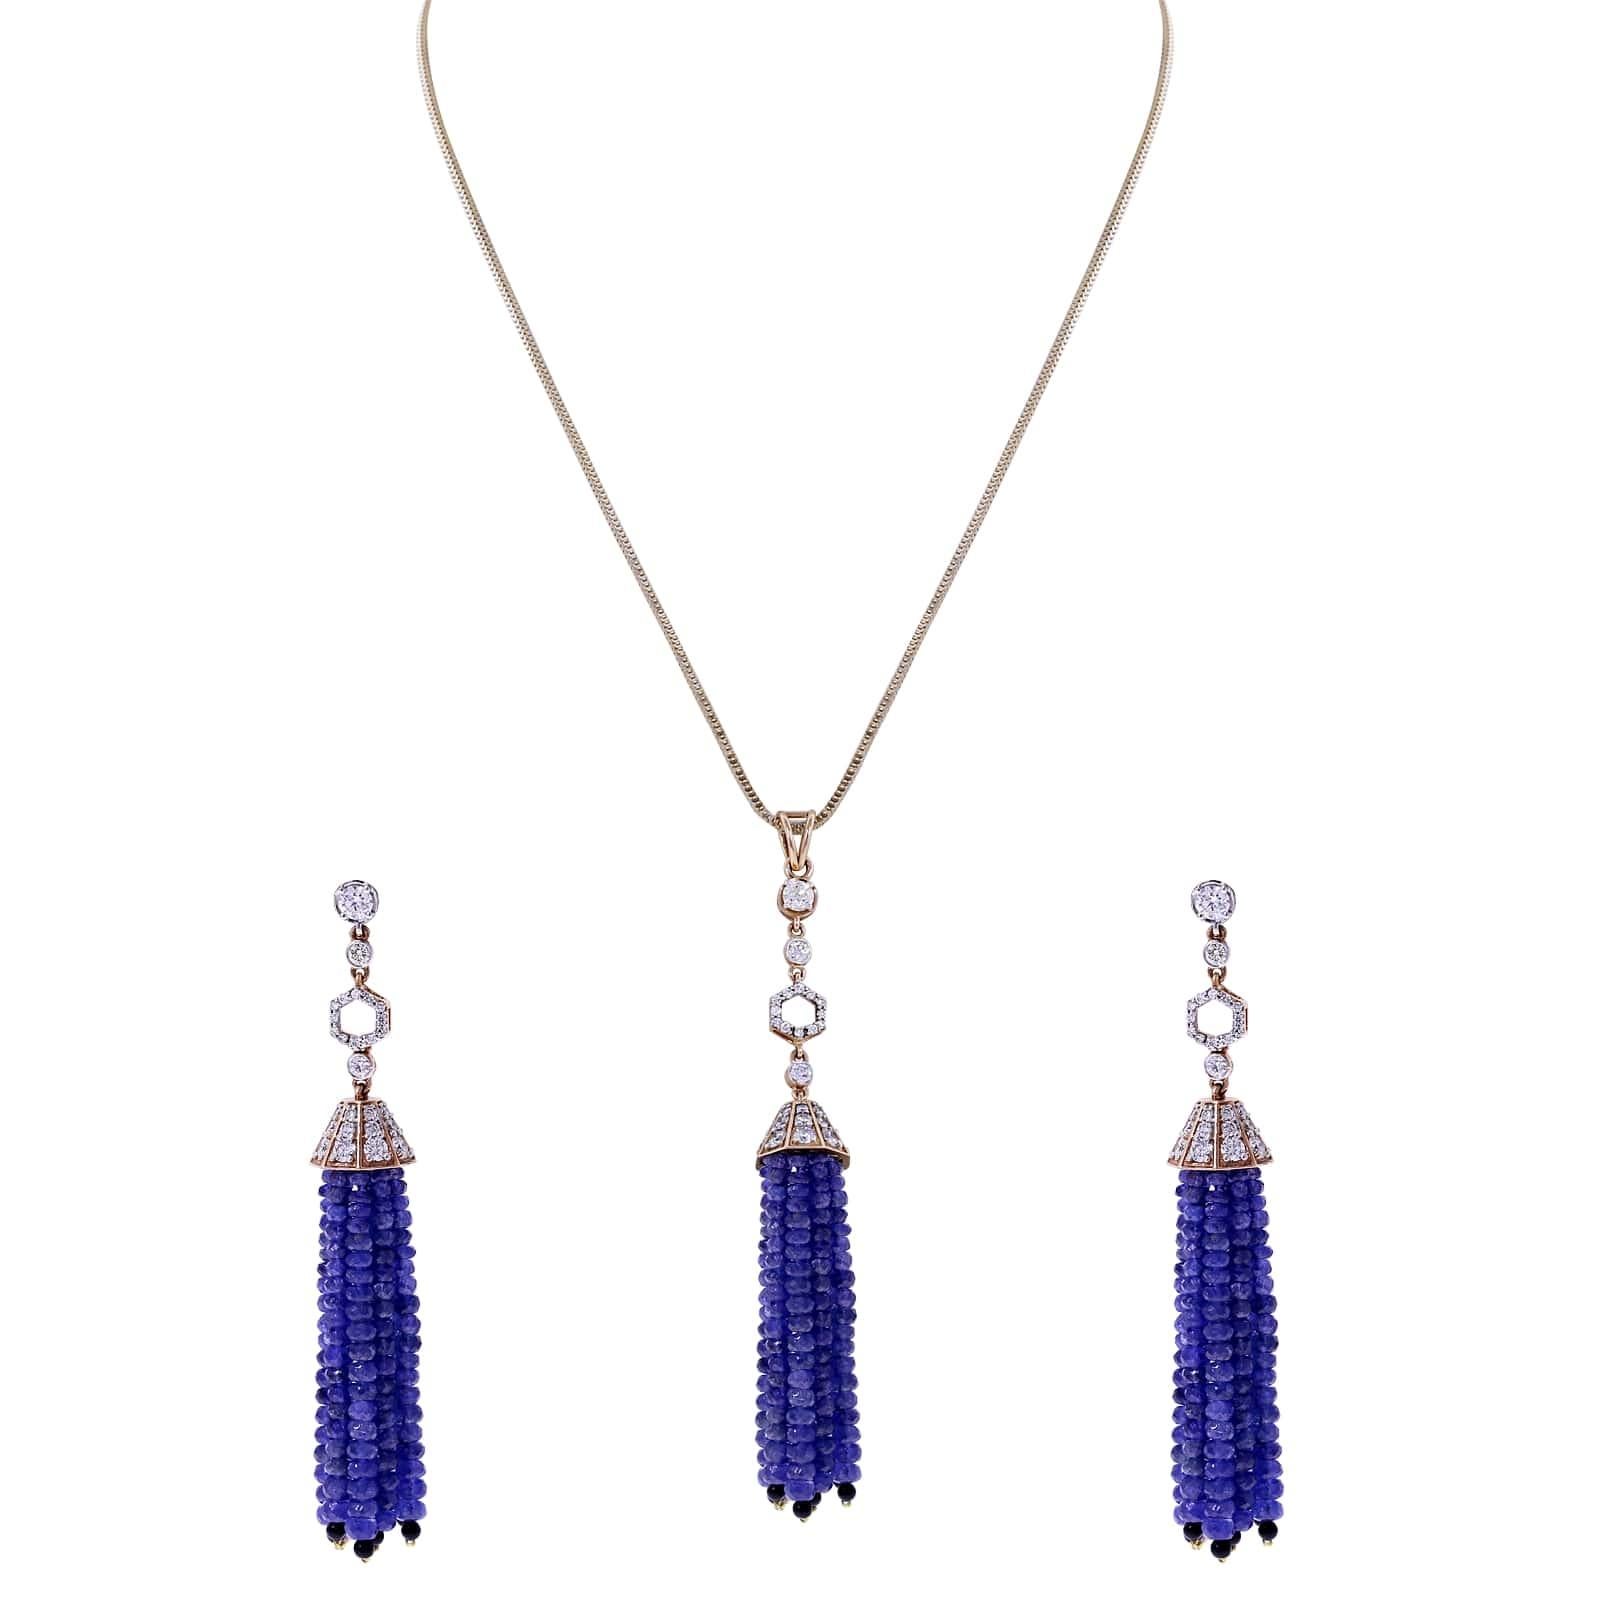 A Faceted Sapphire Bead Tassel Pendant with Diamonds and Onyx. There are 47.24 cts. of Sapphires, 1.31 ct. Onyx, and 1.90 cts. of Diamonds. The total weight of the pendant is 14.38 grams. 